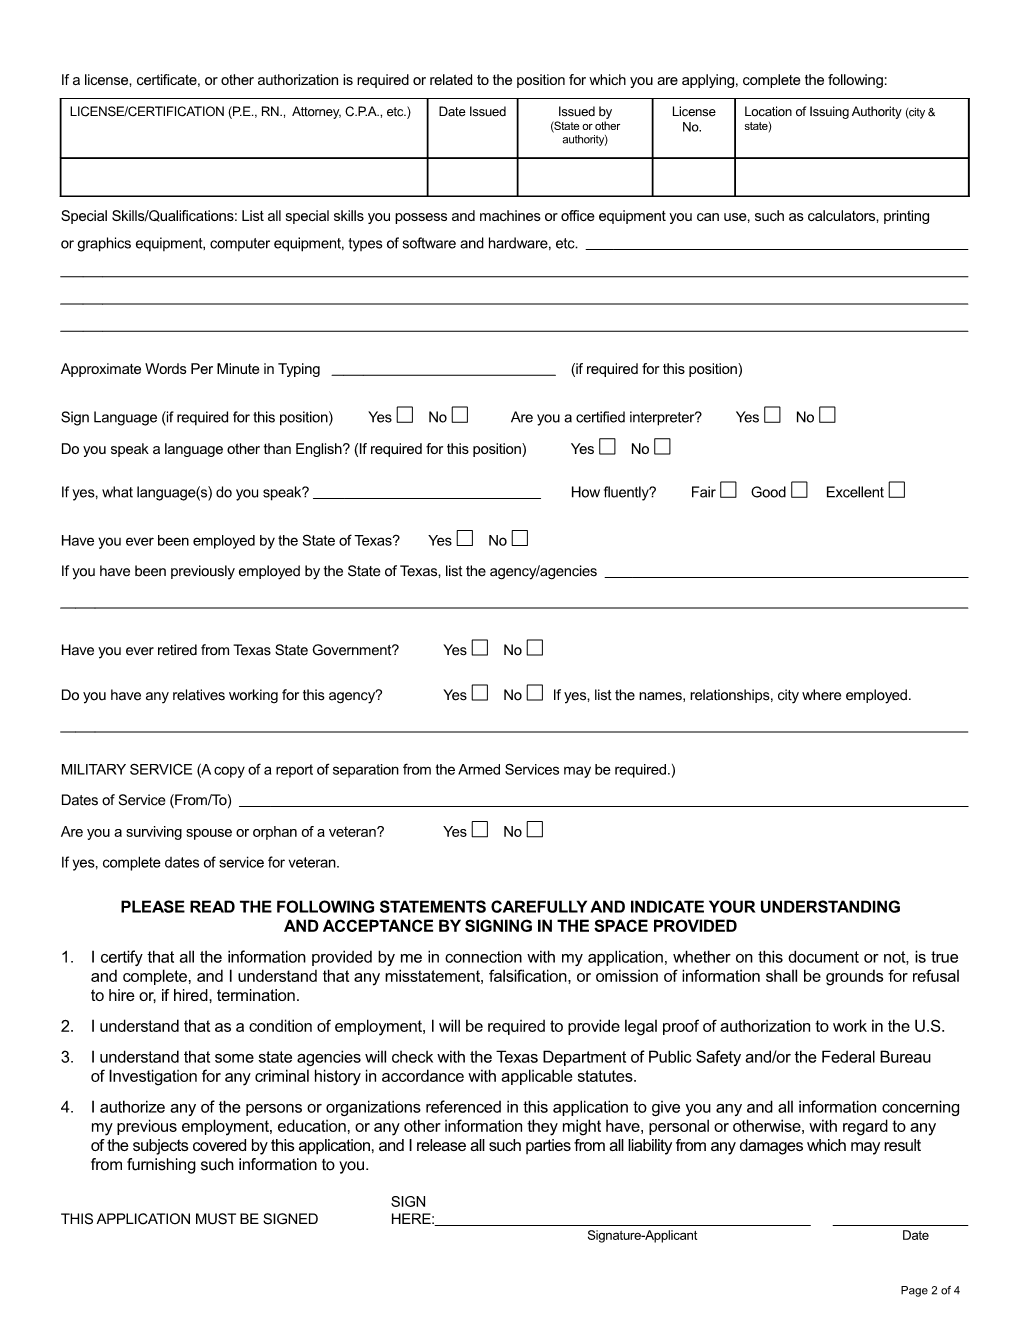 Application for State Employment